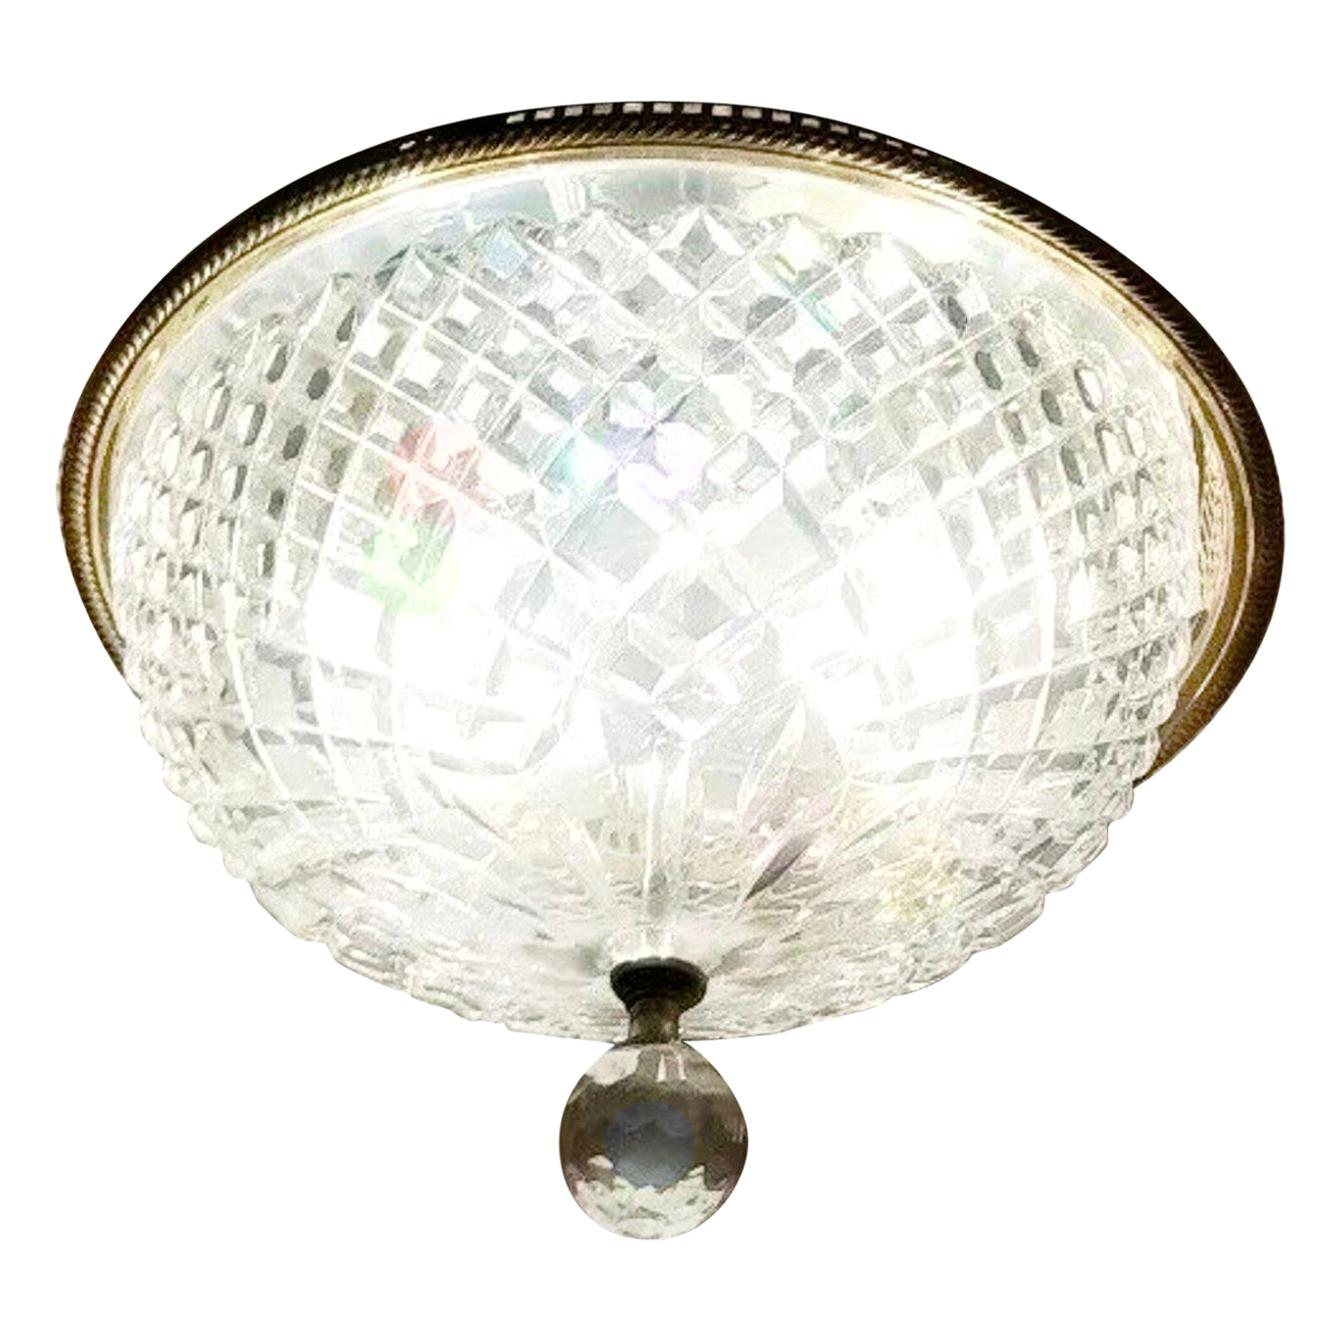 Vintage Waterford Crystal Monumental Flush Ceiling Fixture, Signed, Ireland